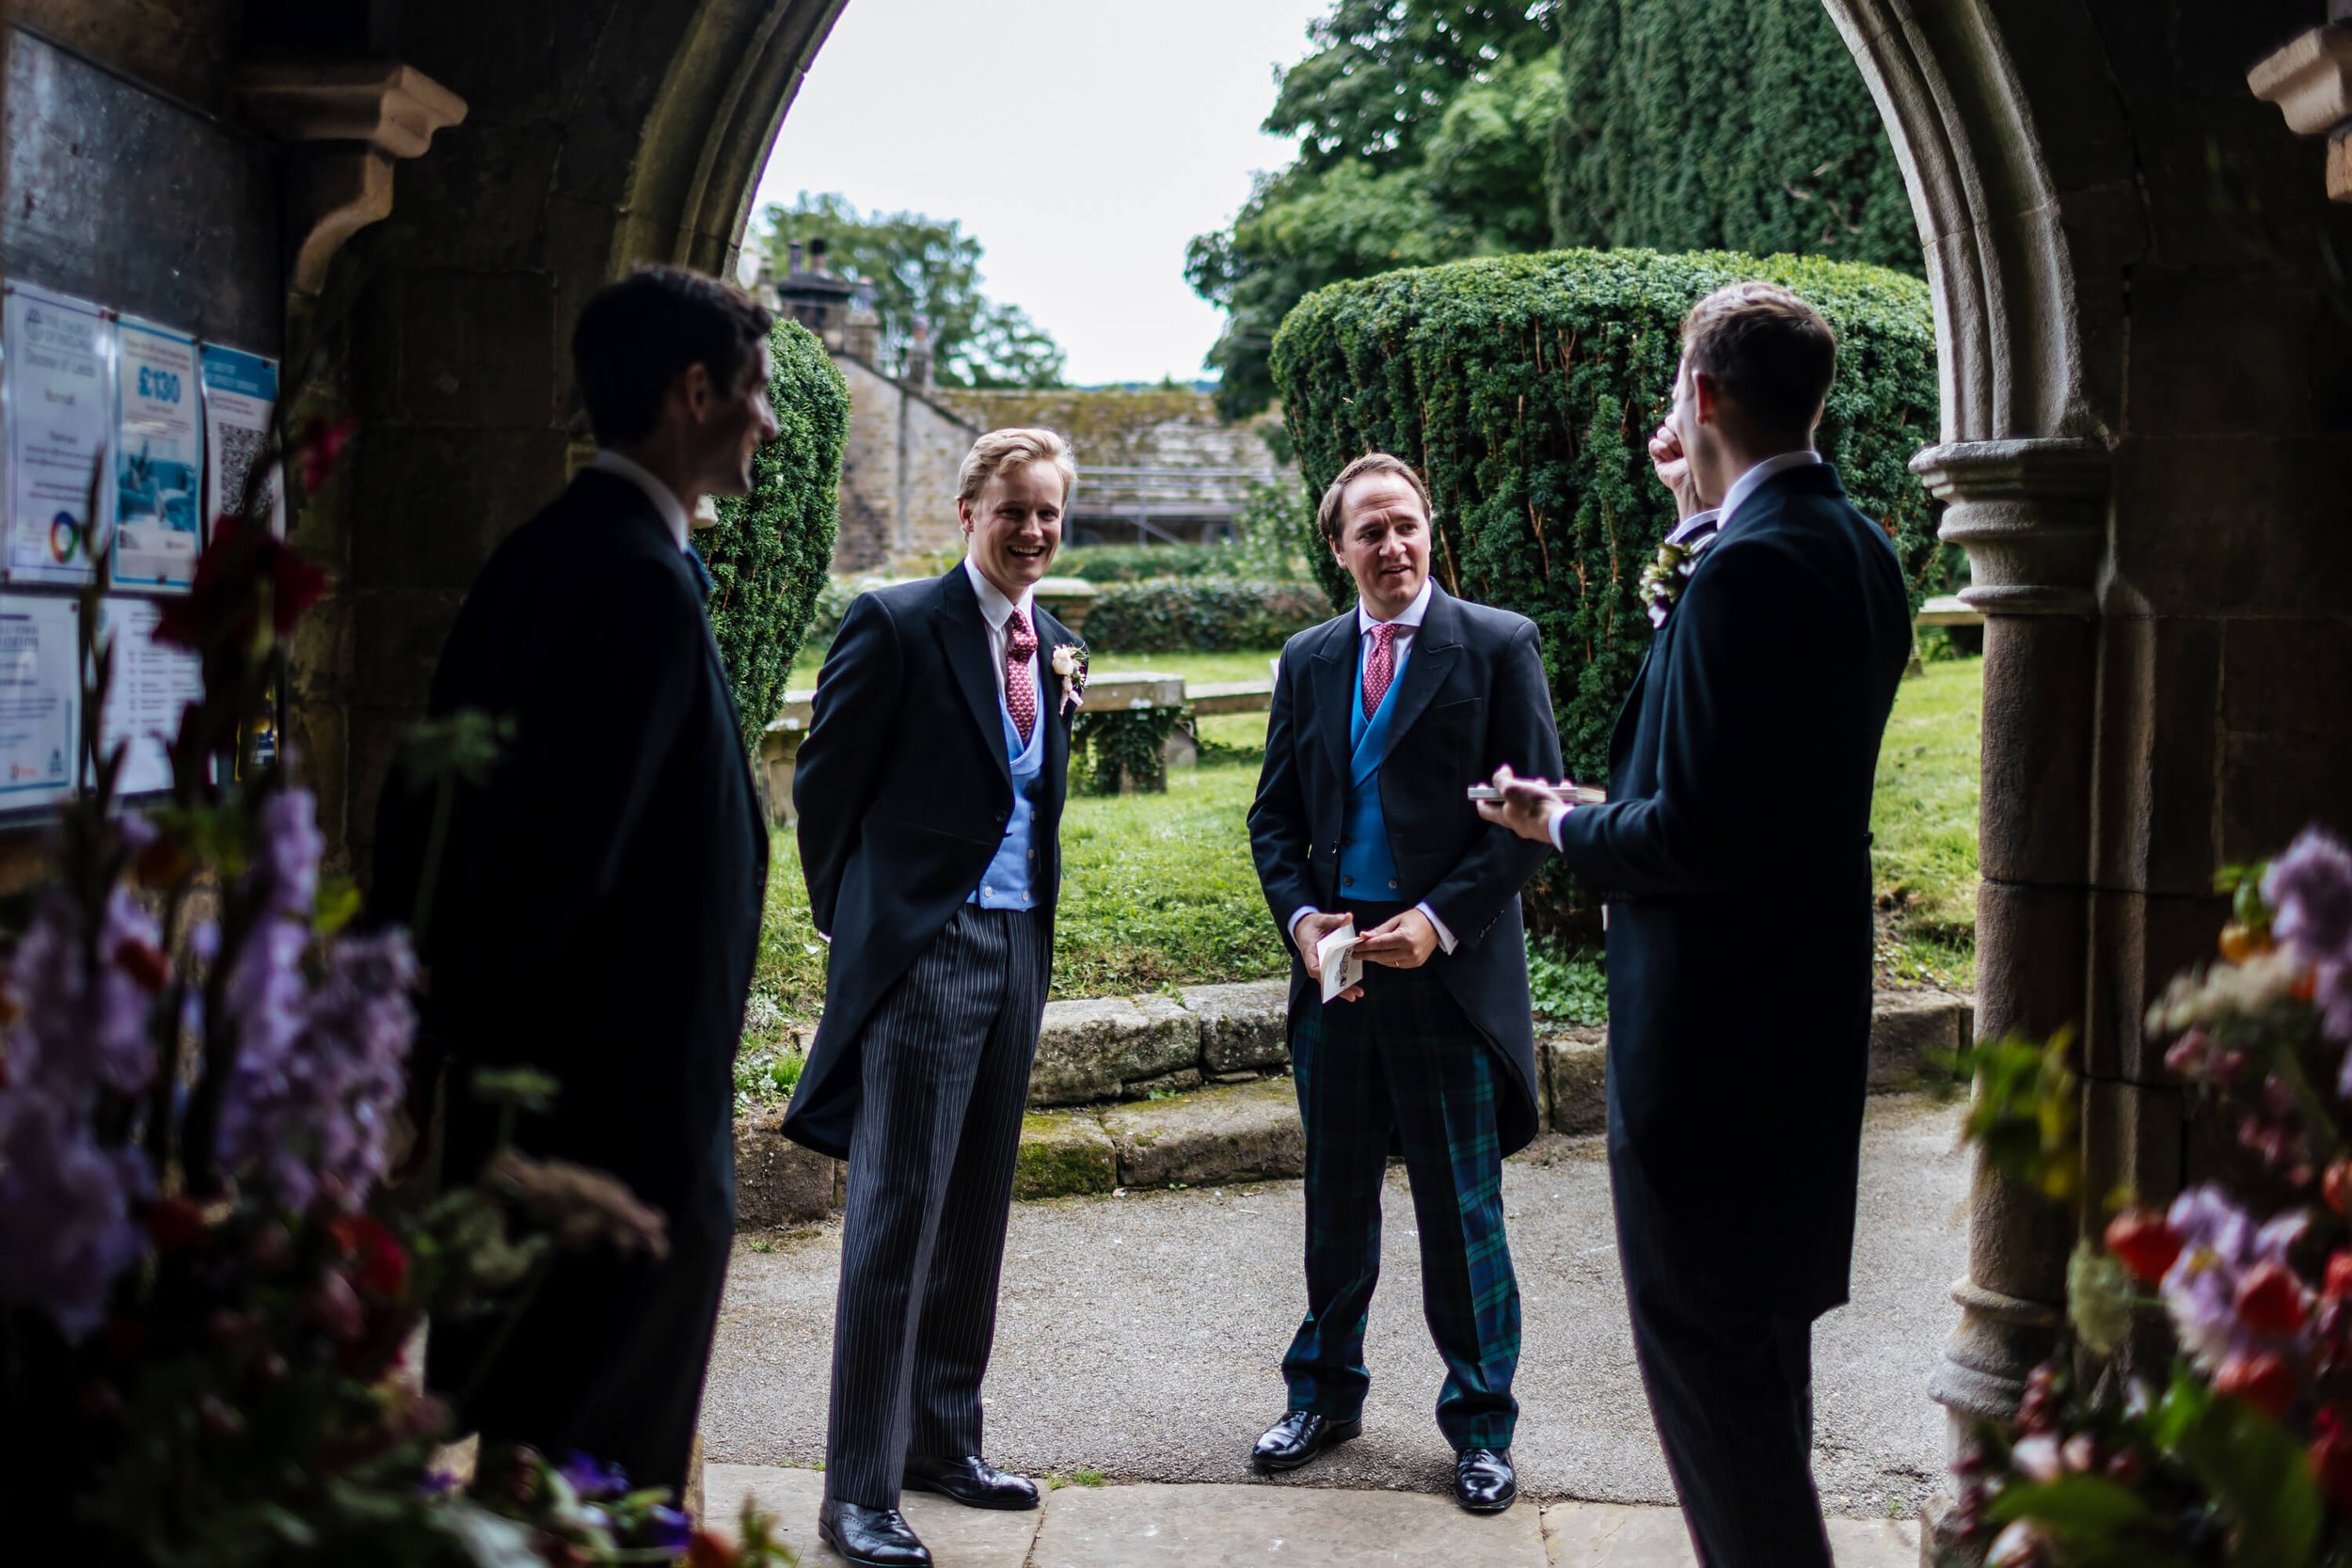 Groomsmen chatting at the entrance of the Burnsall church